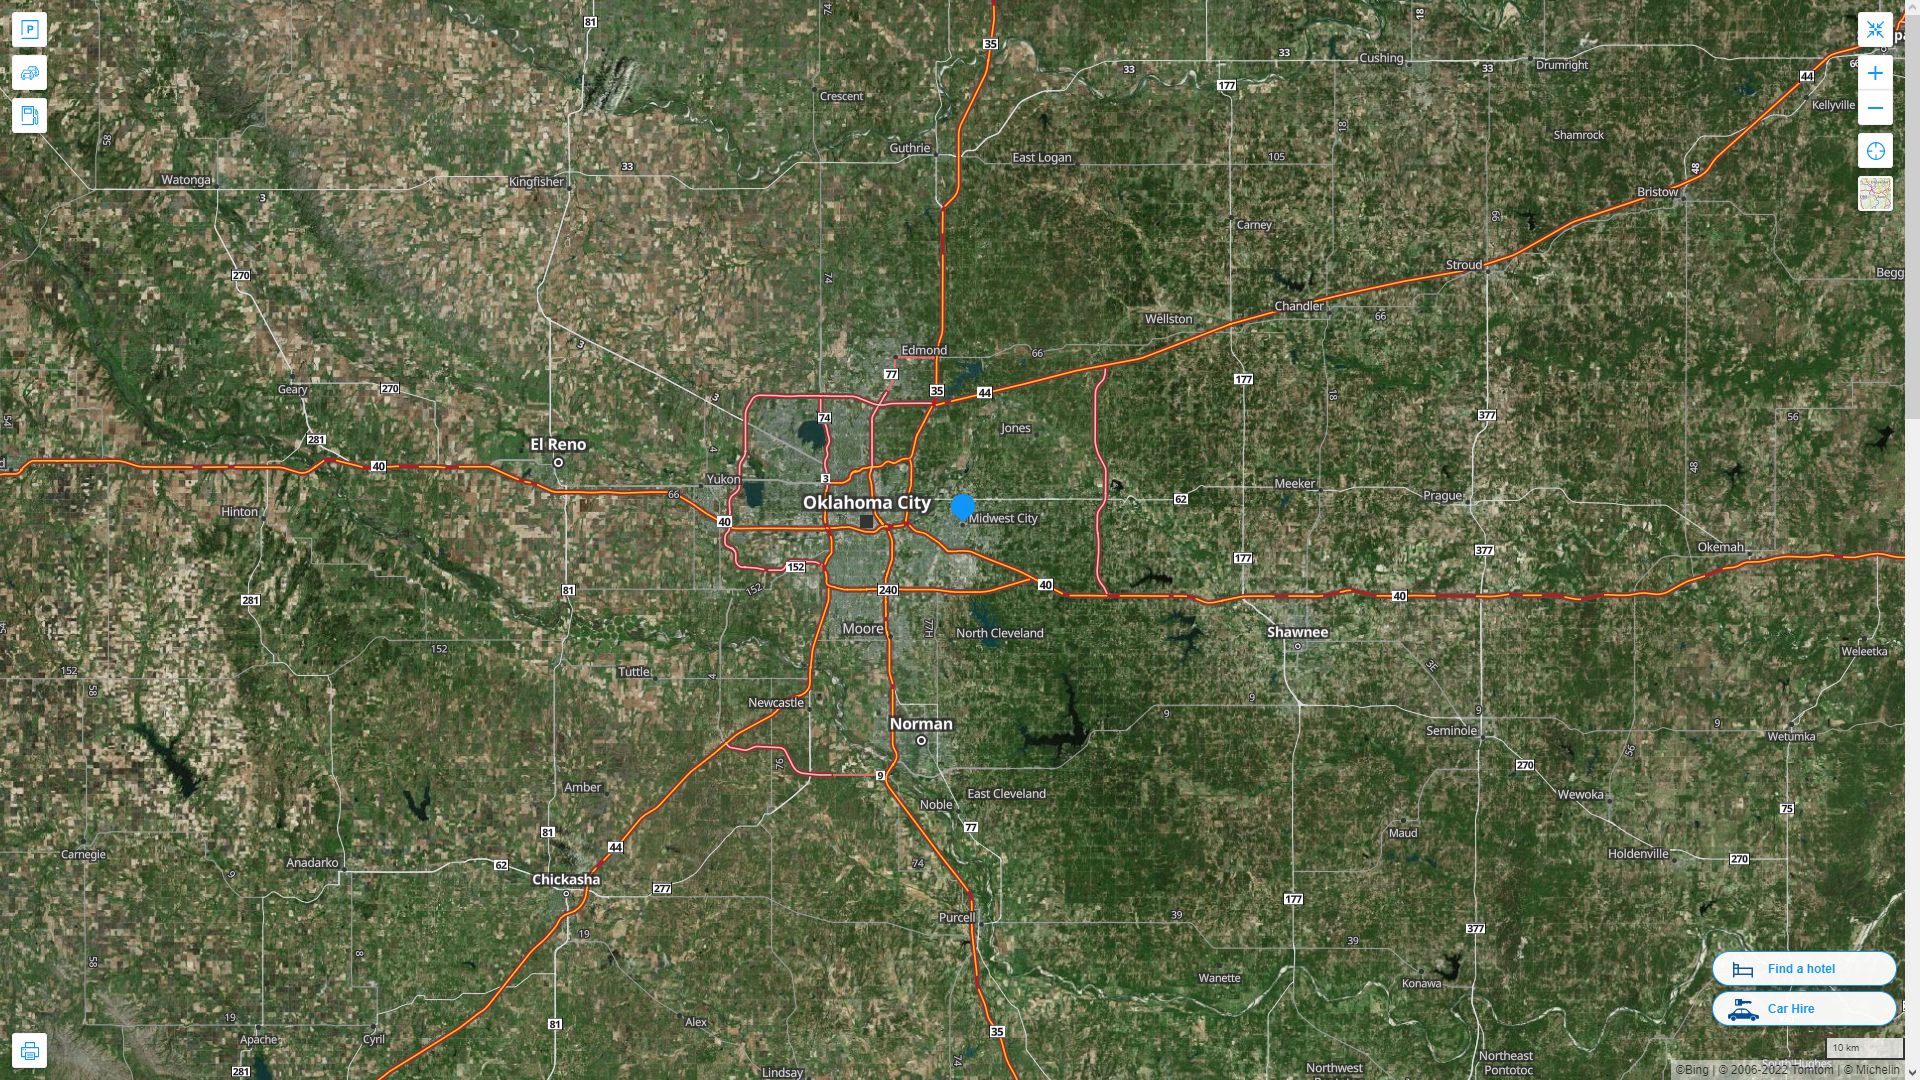 Midwest City Oklahoma Highway and Road Map with Satellite View